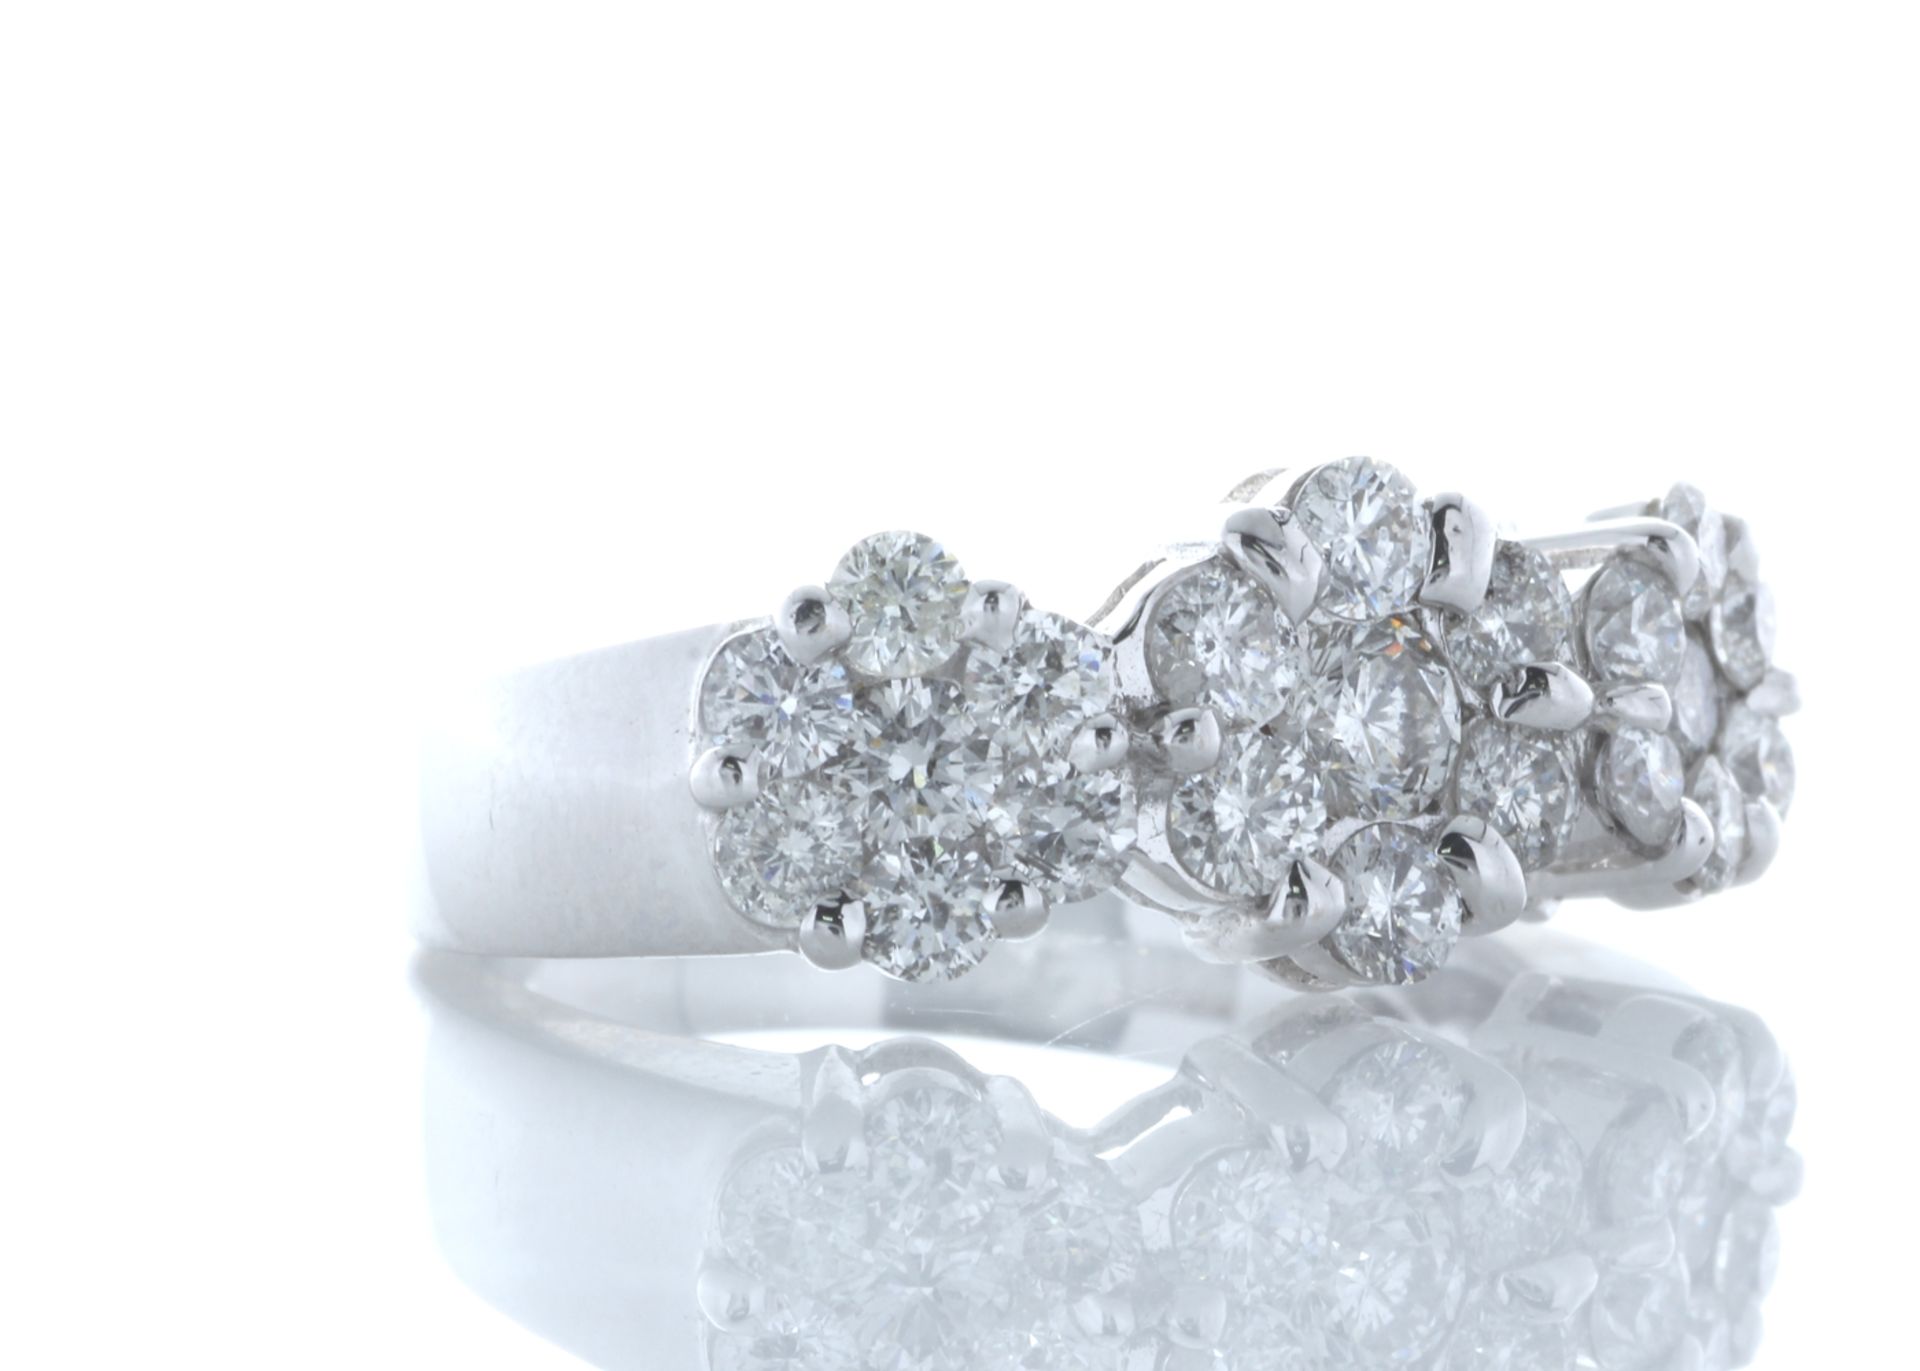 18ct White Gold Flower Cluster Diamond Ring 1.50 Carats - Valued By GIE £11,850.00 - Twenty one - Image 4 of 5